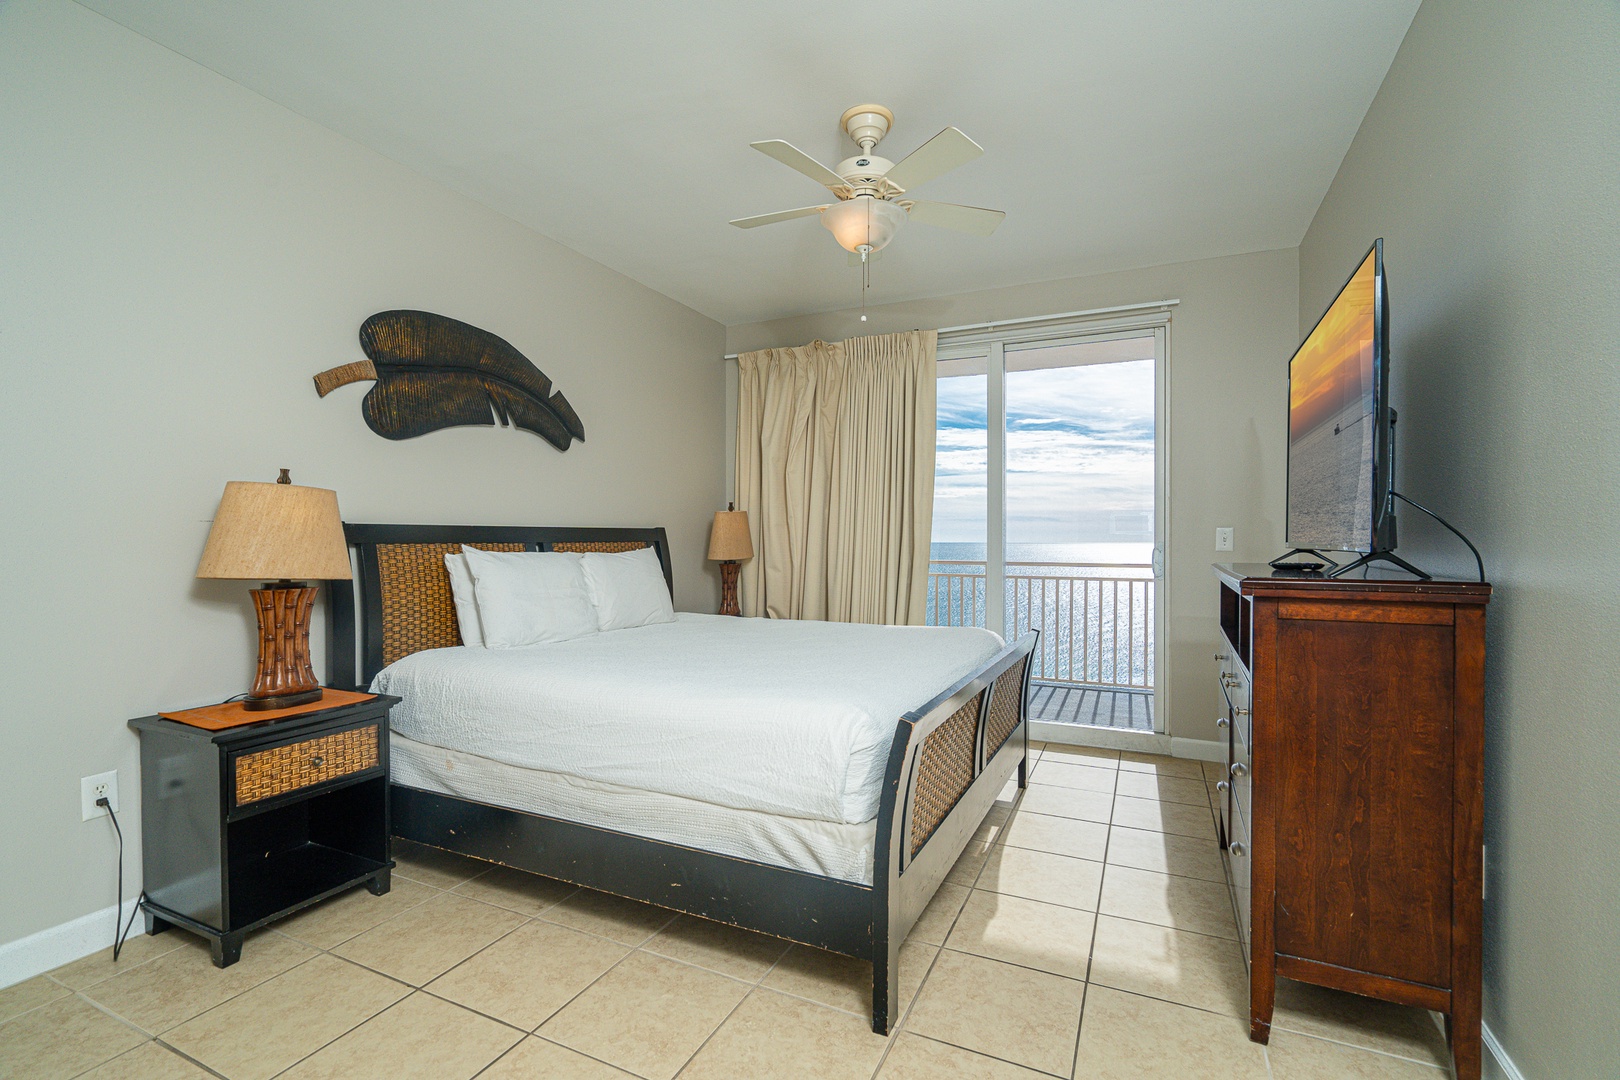 The king suite boasts a private ensuite, Smart TV, & balcony access